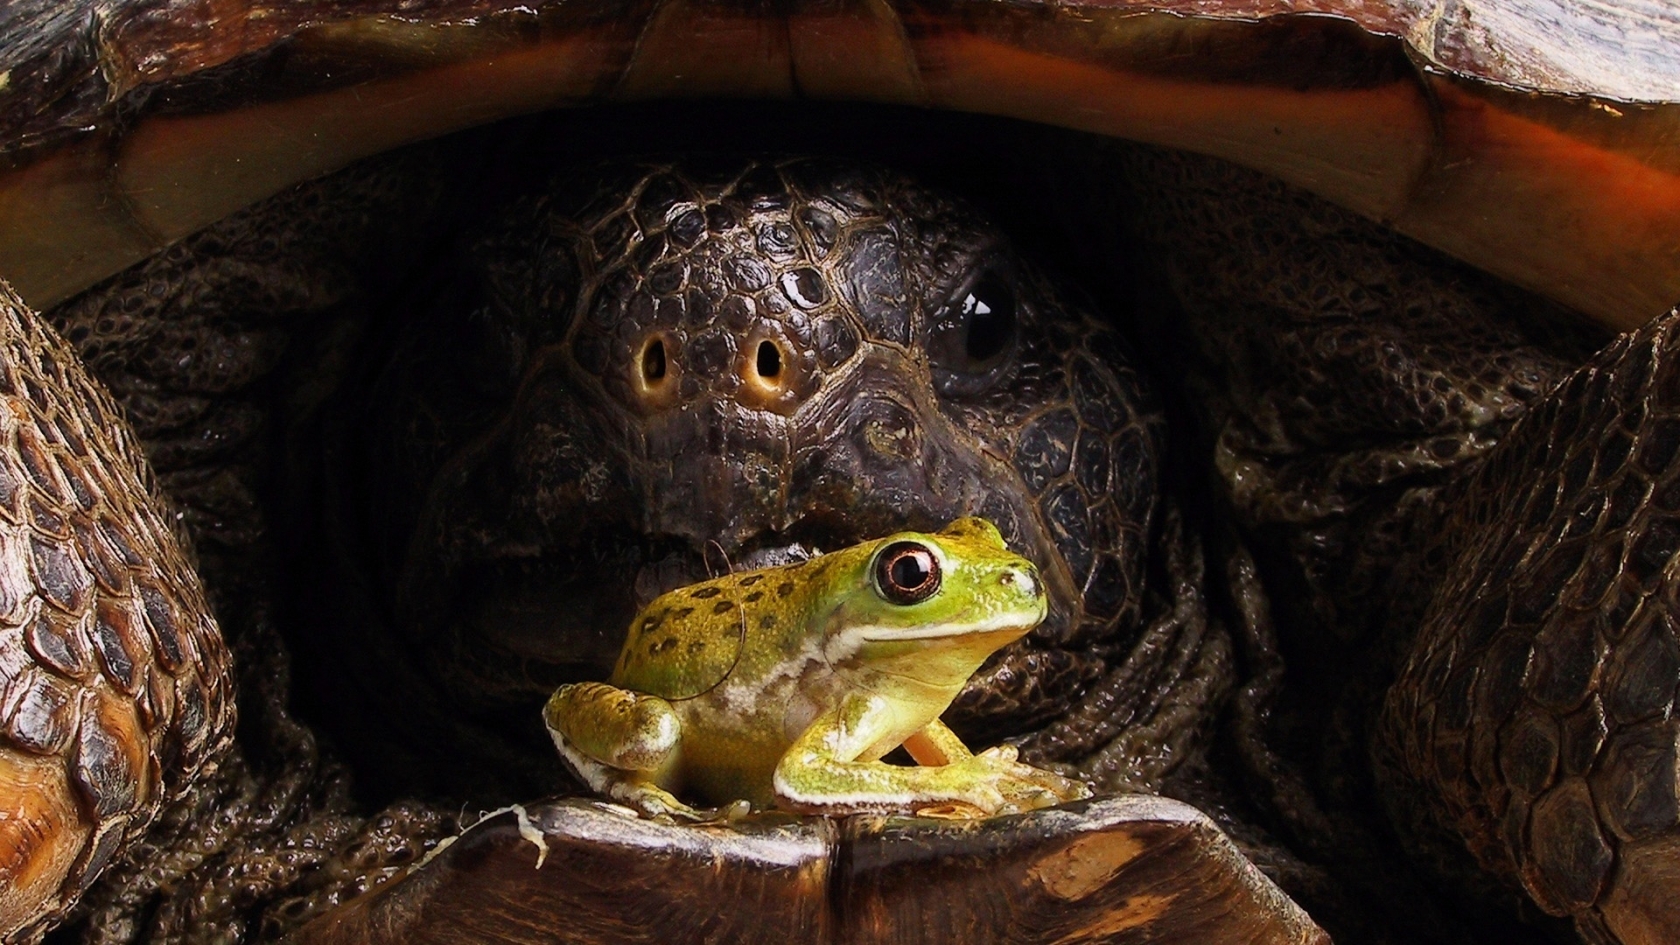 Big turtle and little frog for 1680 x 945 HDTV resolution